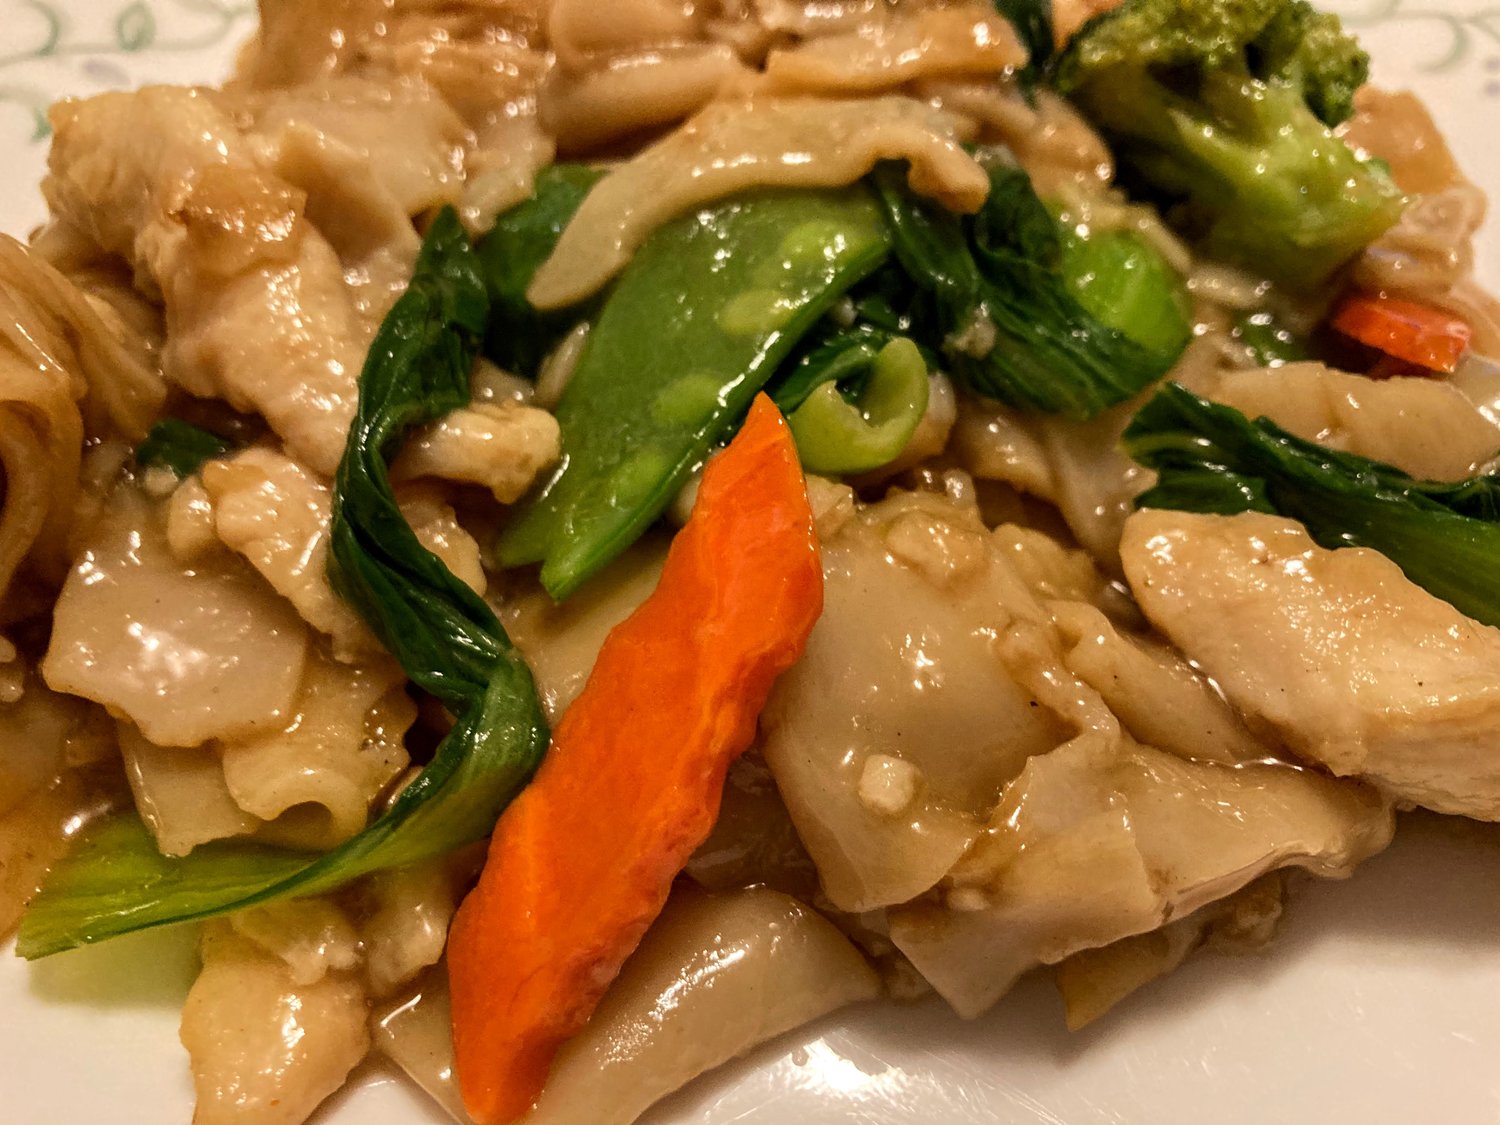 Ho fun noodles with chicken and vegetables slathered in an umami gravy sauce.